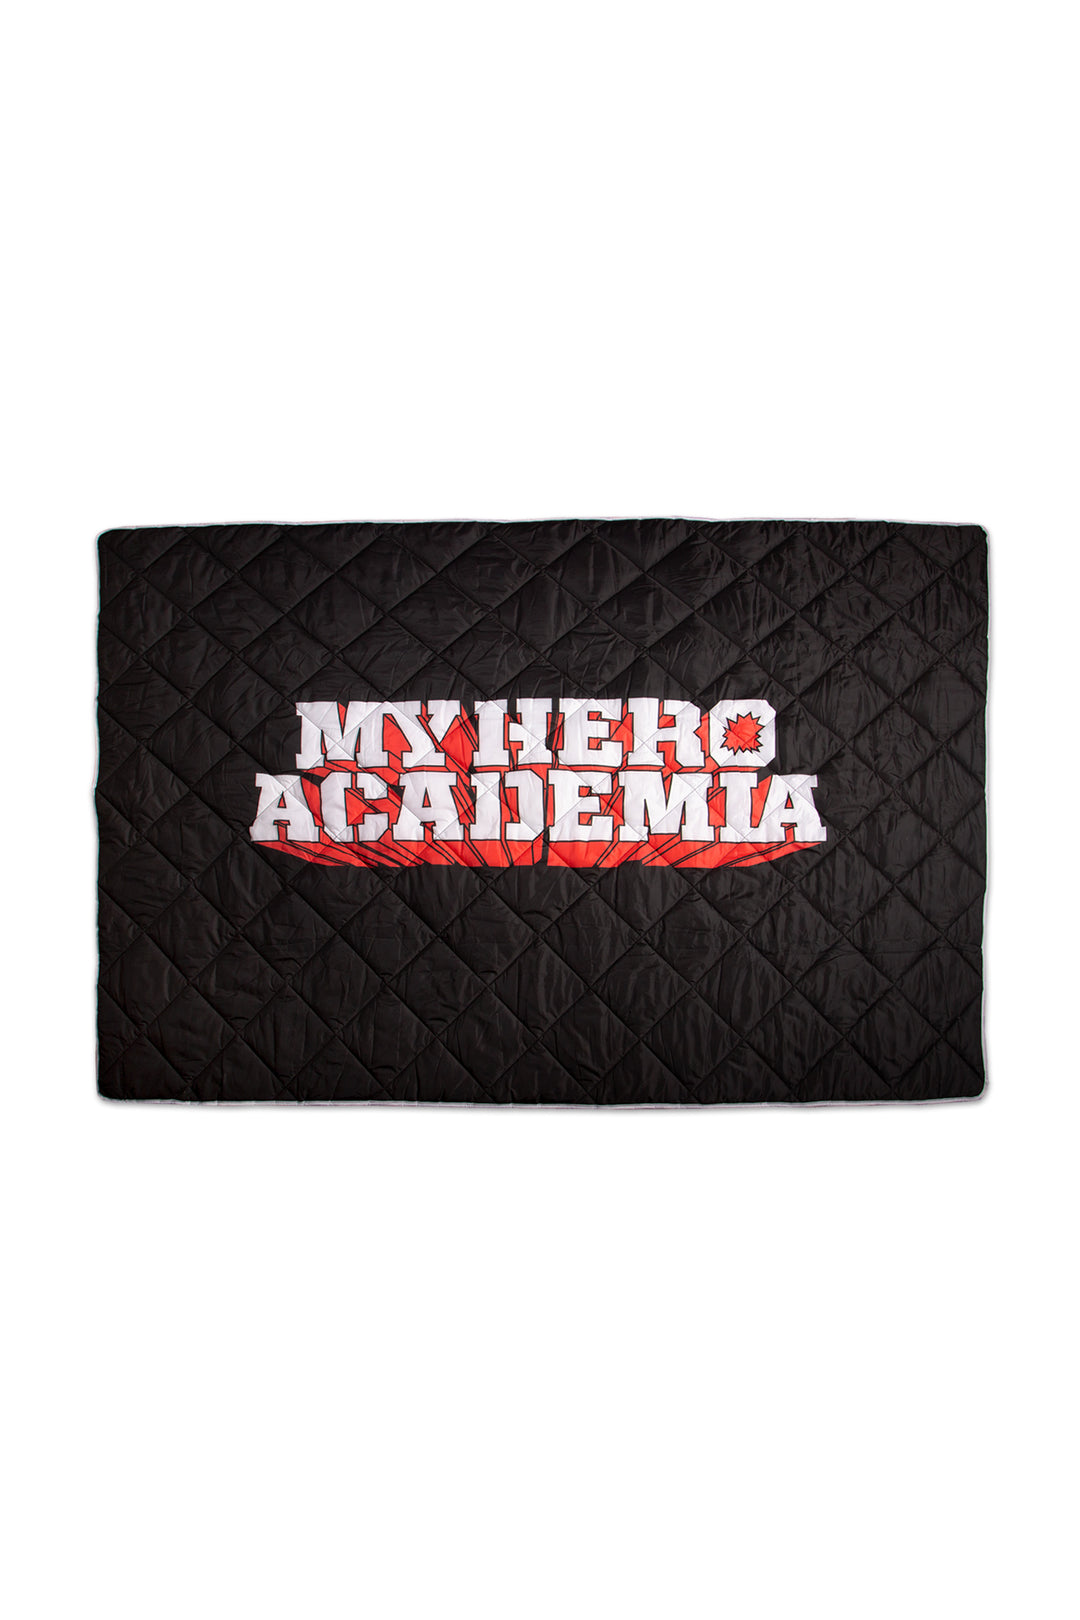 My Hero Academia Quilted Travel Blanket